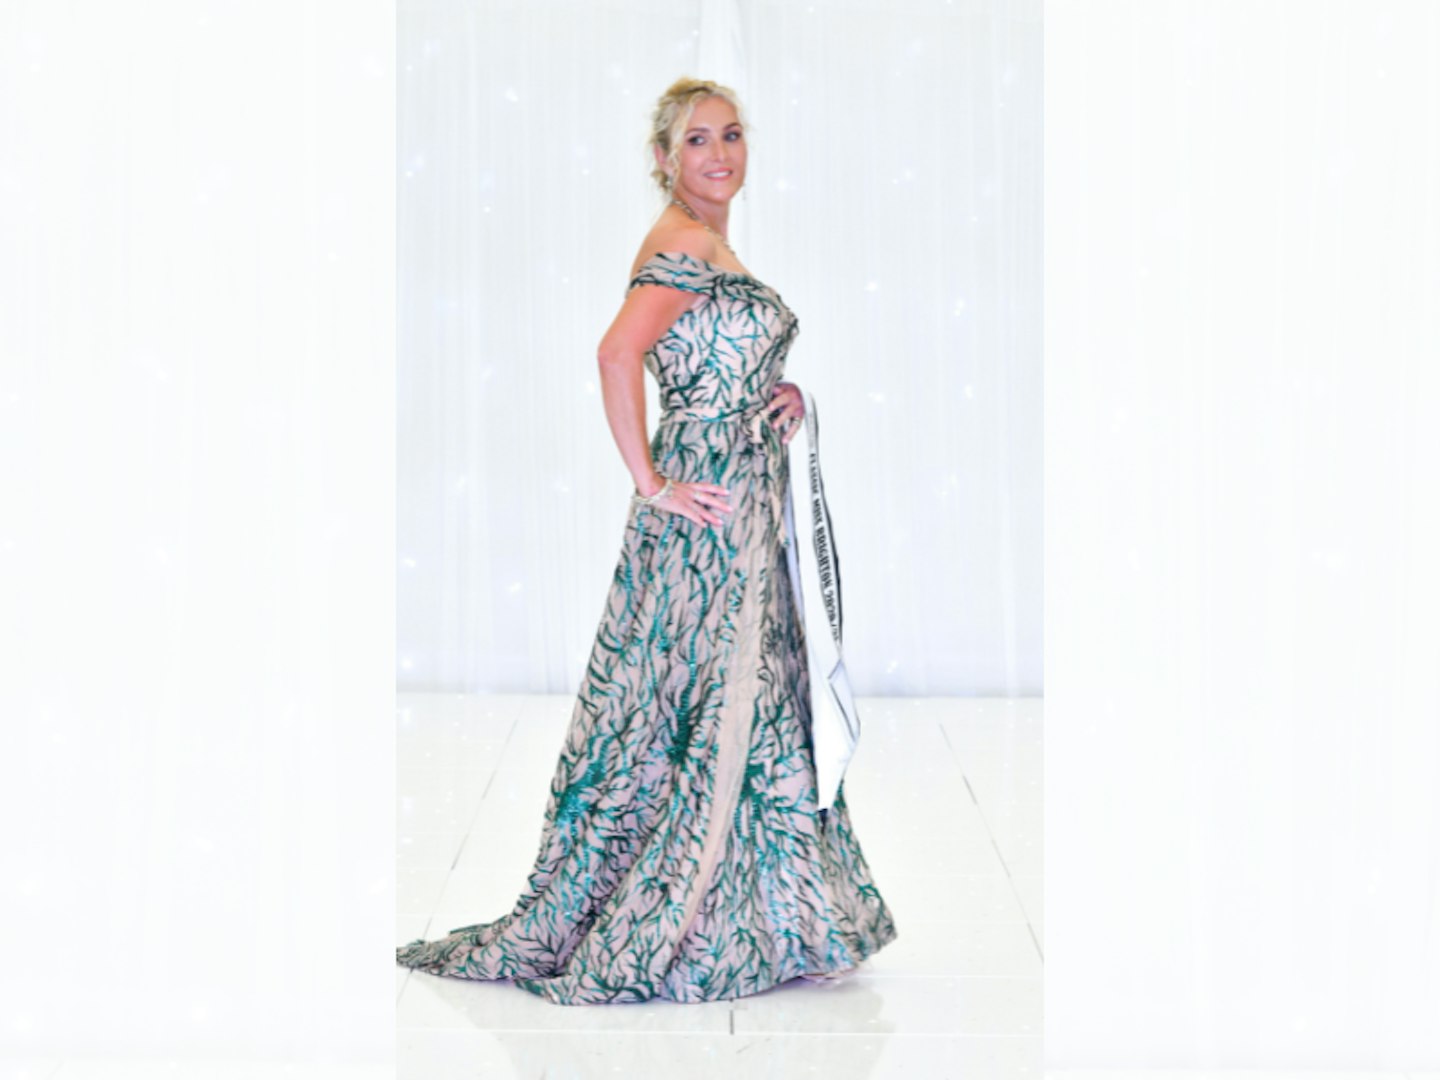 Blonde woman in long dress holding beauty pageant sash